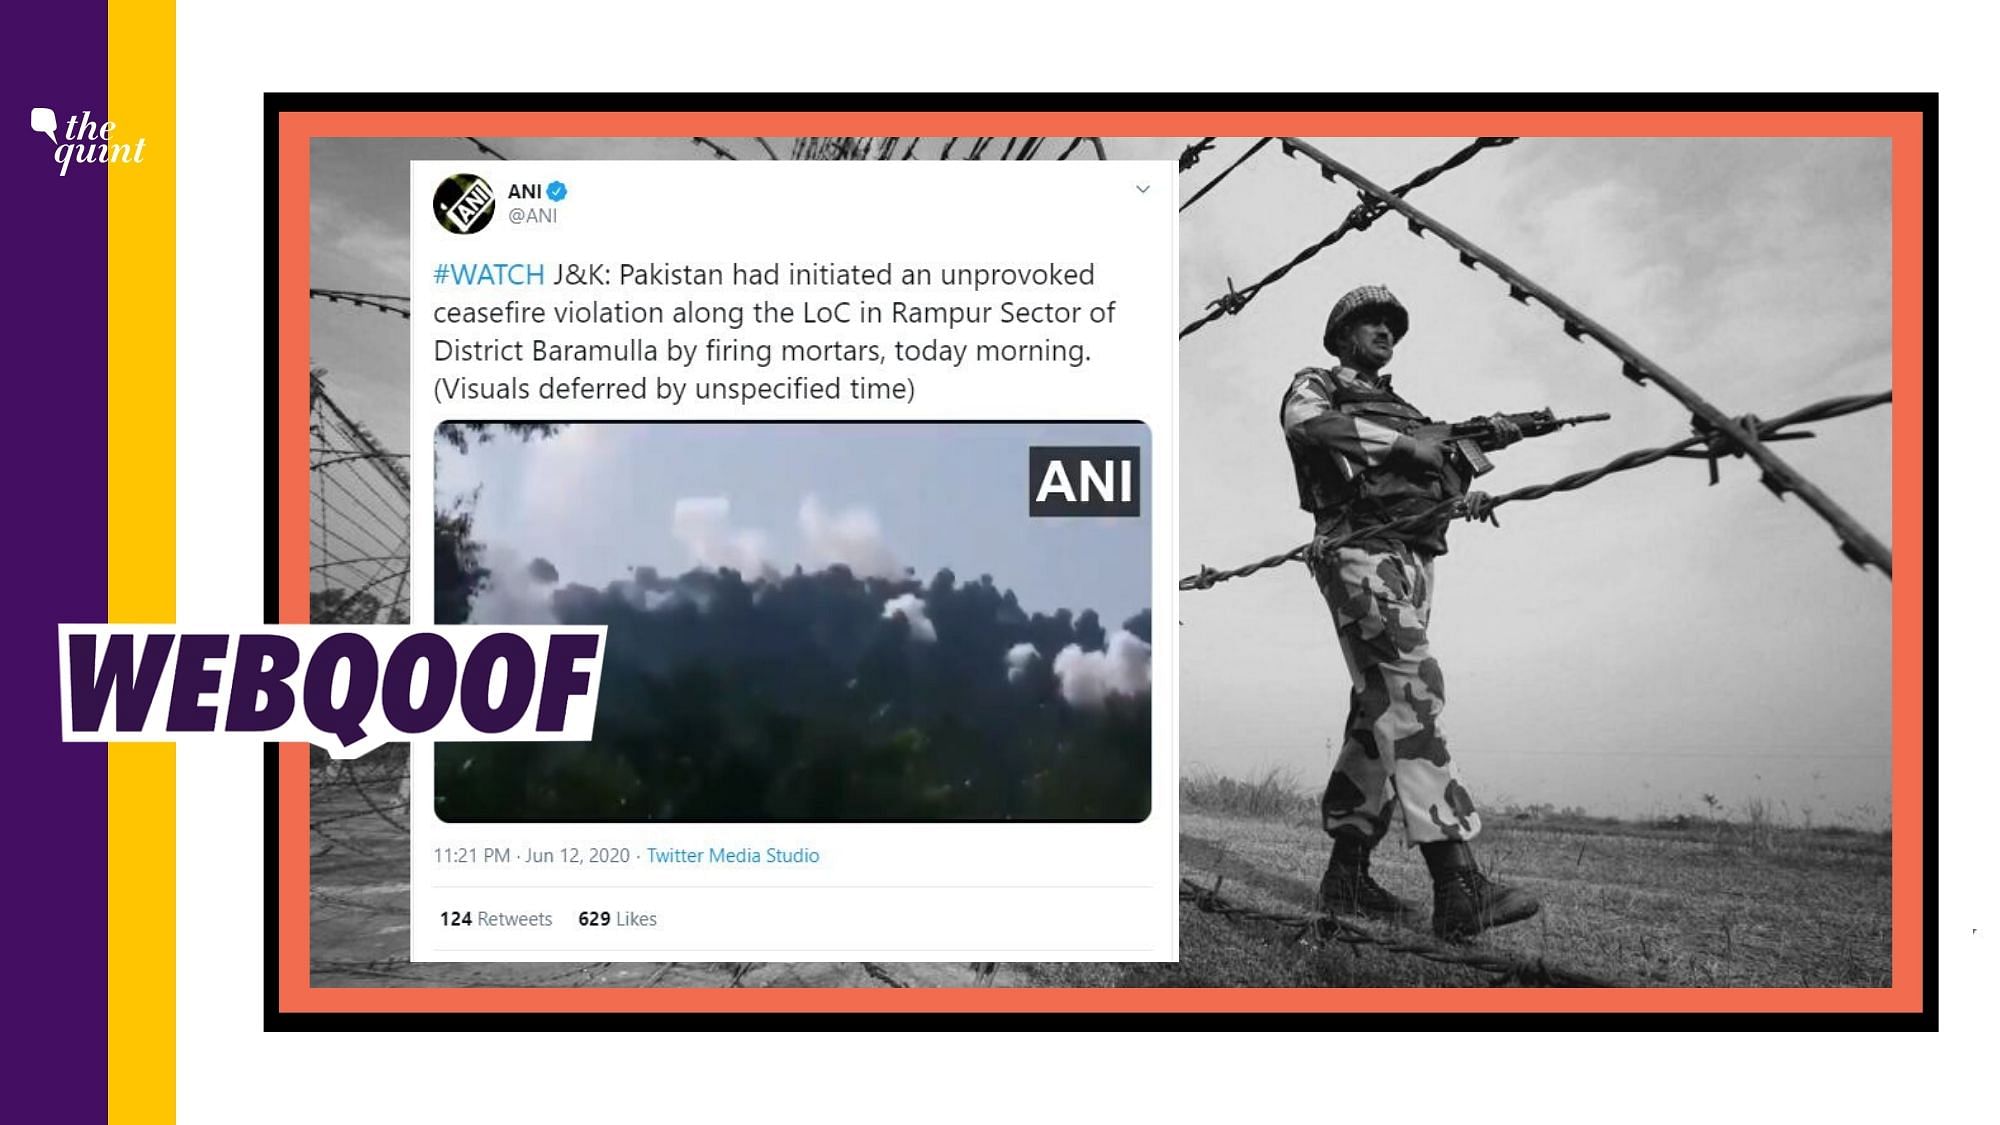 On 12 June, news agency ANI shared old visuals as “unprovoked ceasefire violation by Pakistan along the LoC.”